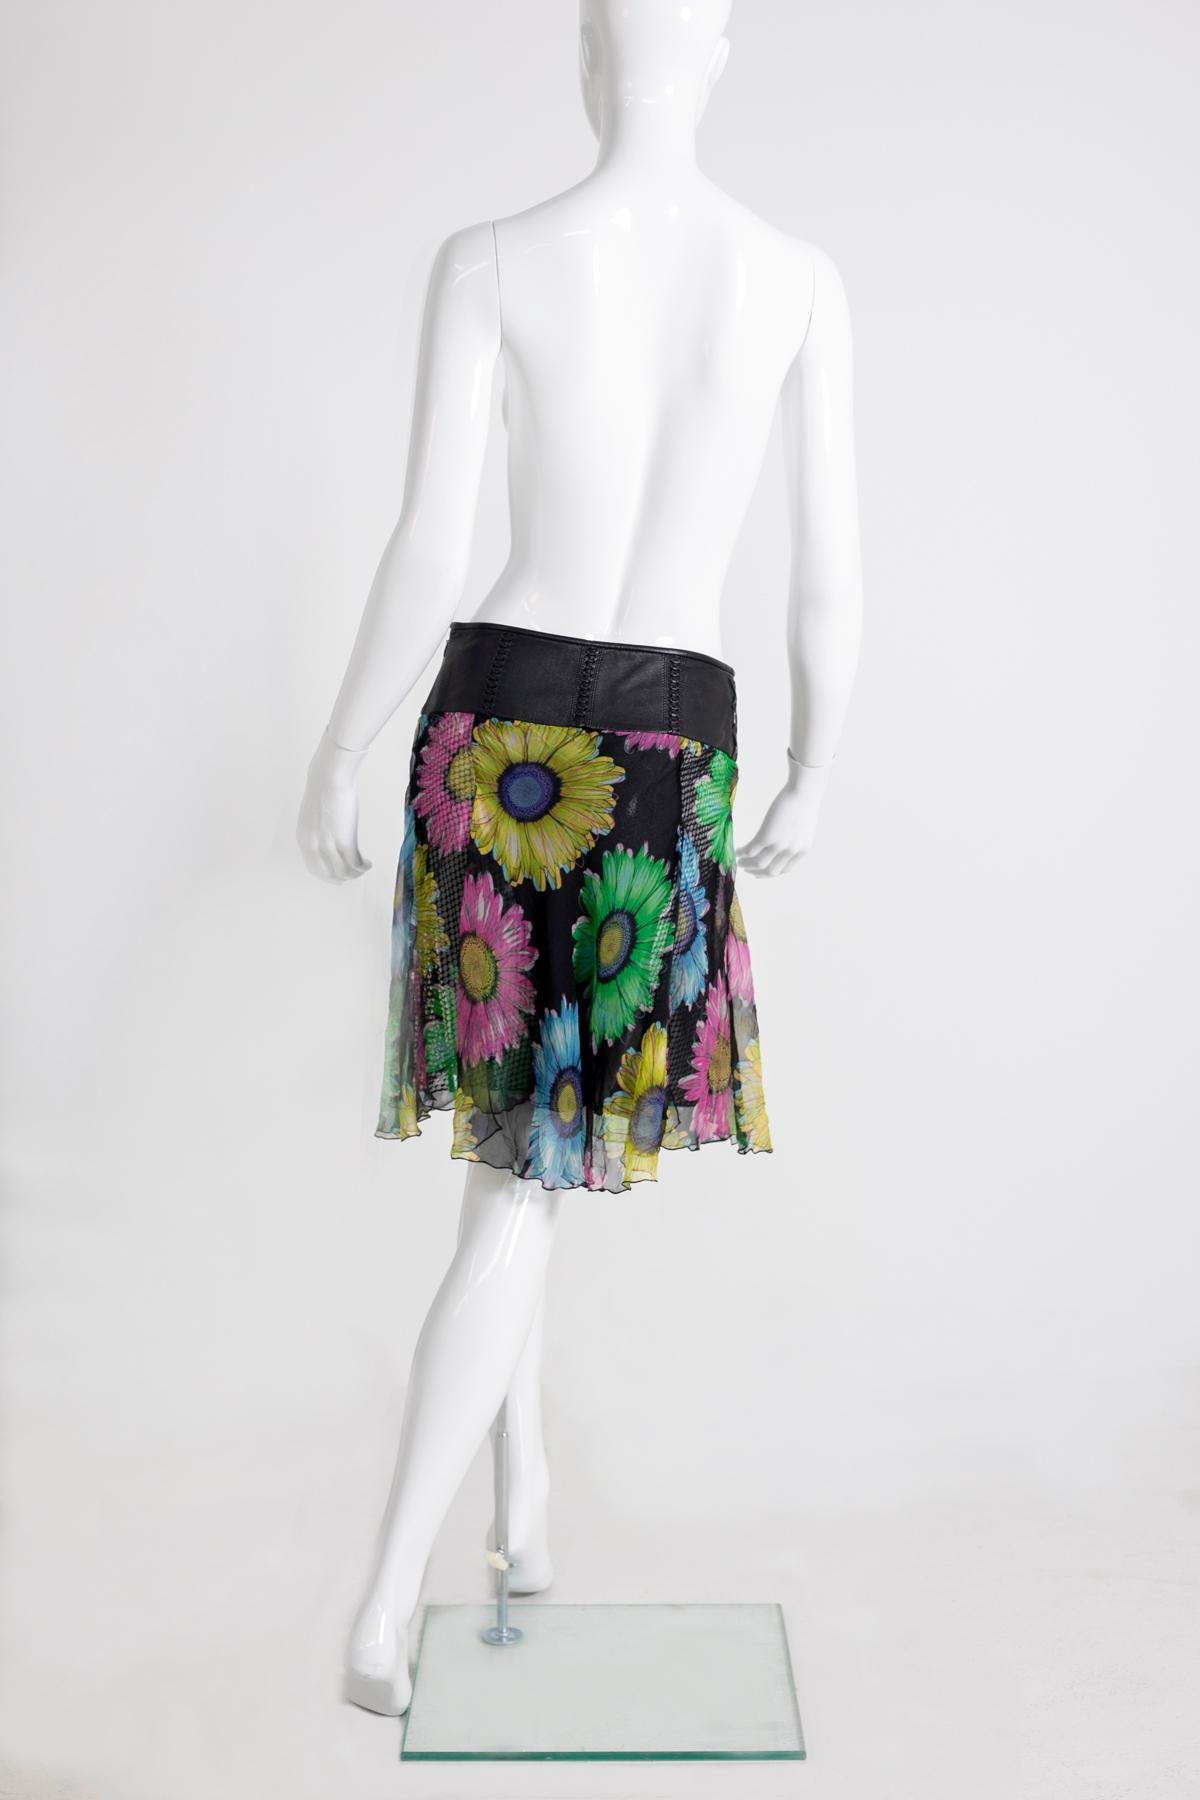 Black Gianni Versace Couture Leather and Silk Short Skirt 1990s For Sale